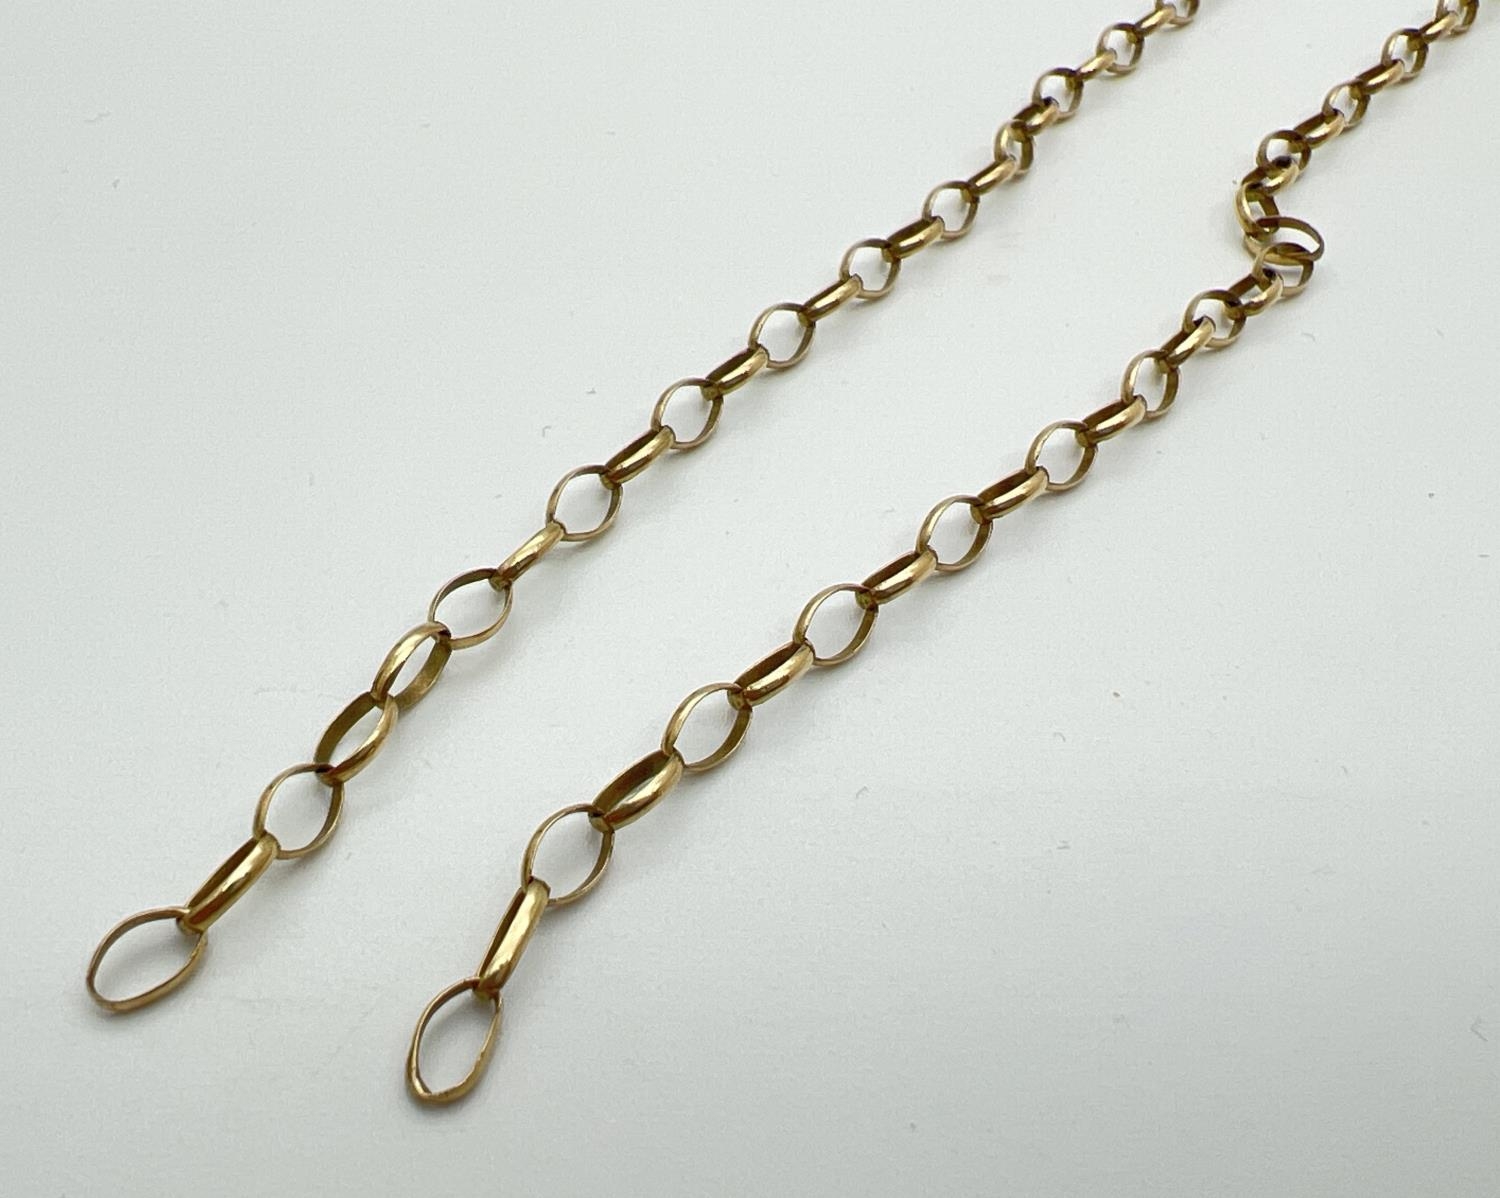 A 9ct gold 24" belcher chain with lobster claw clasp for repair or scrap. Total weight approx. 6.4g. - Image 2 of 3